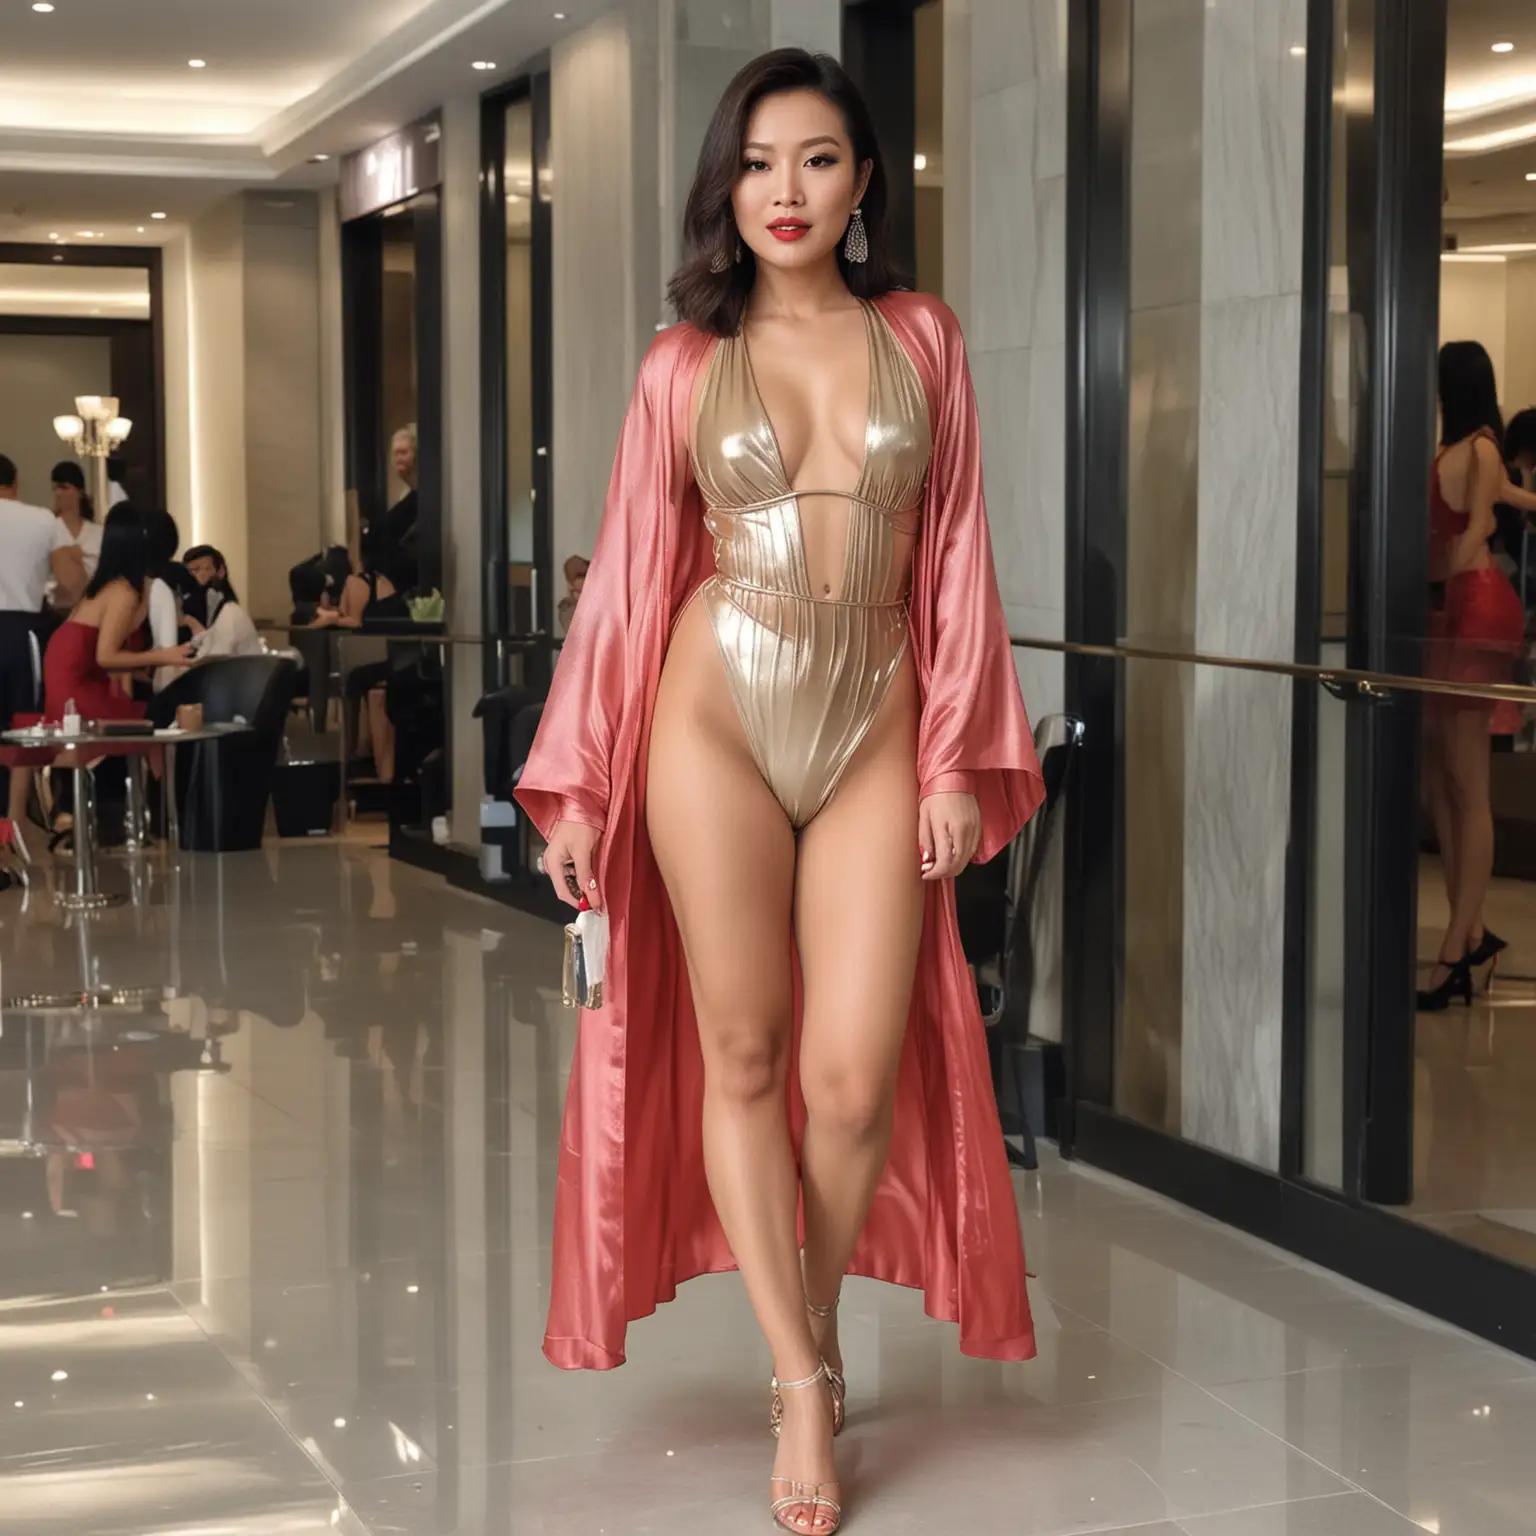 Beautiful Singaporean Mongchin Yeoh wearing a metallic bikini and a sheer silk chiffon robe, red glossy lipstick, lots of makeup and Louboutin patent leather heels in a crowded office lobby. Passers by ogle at her